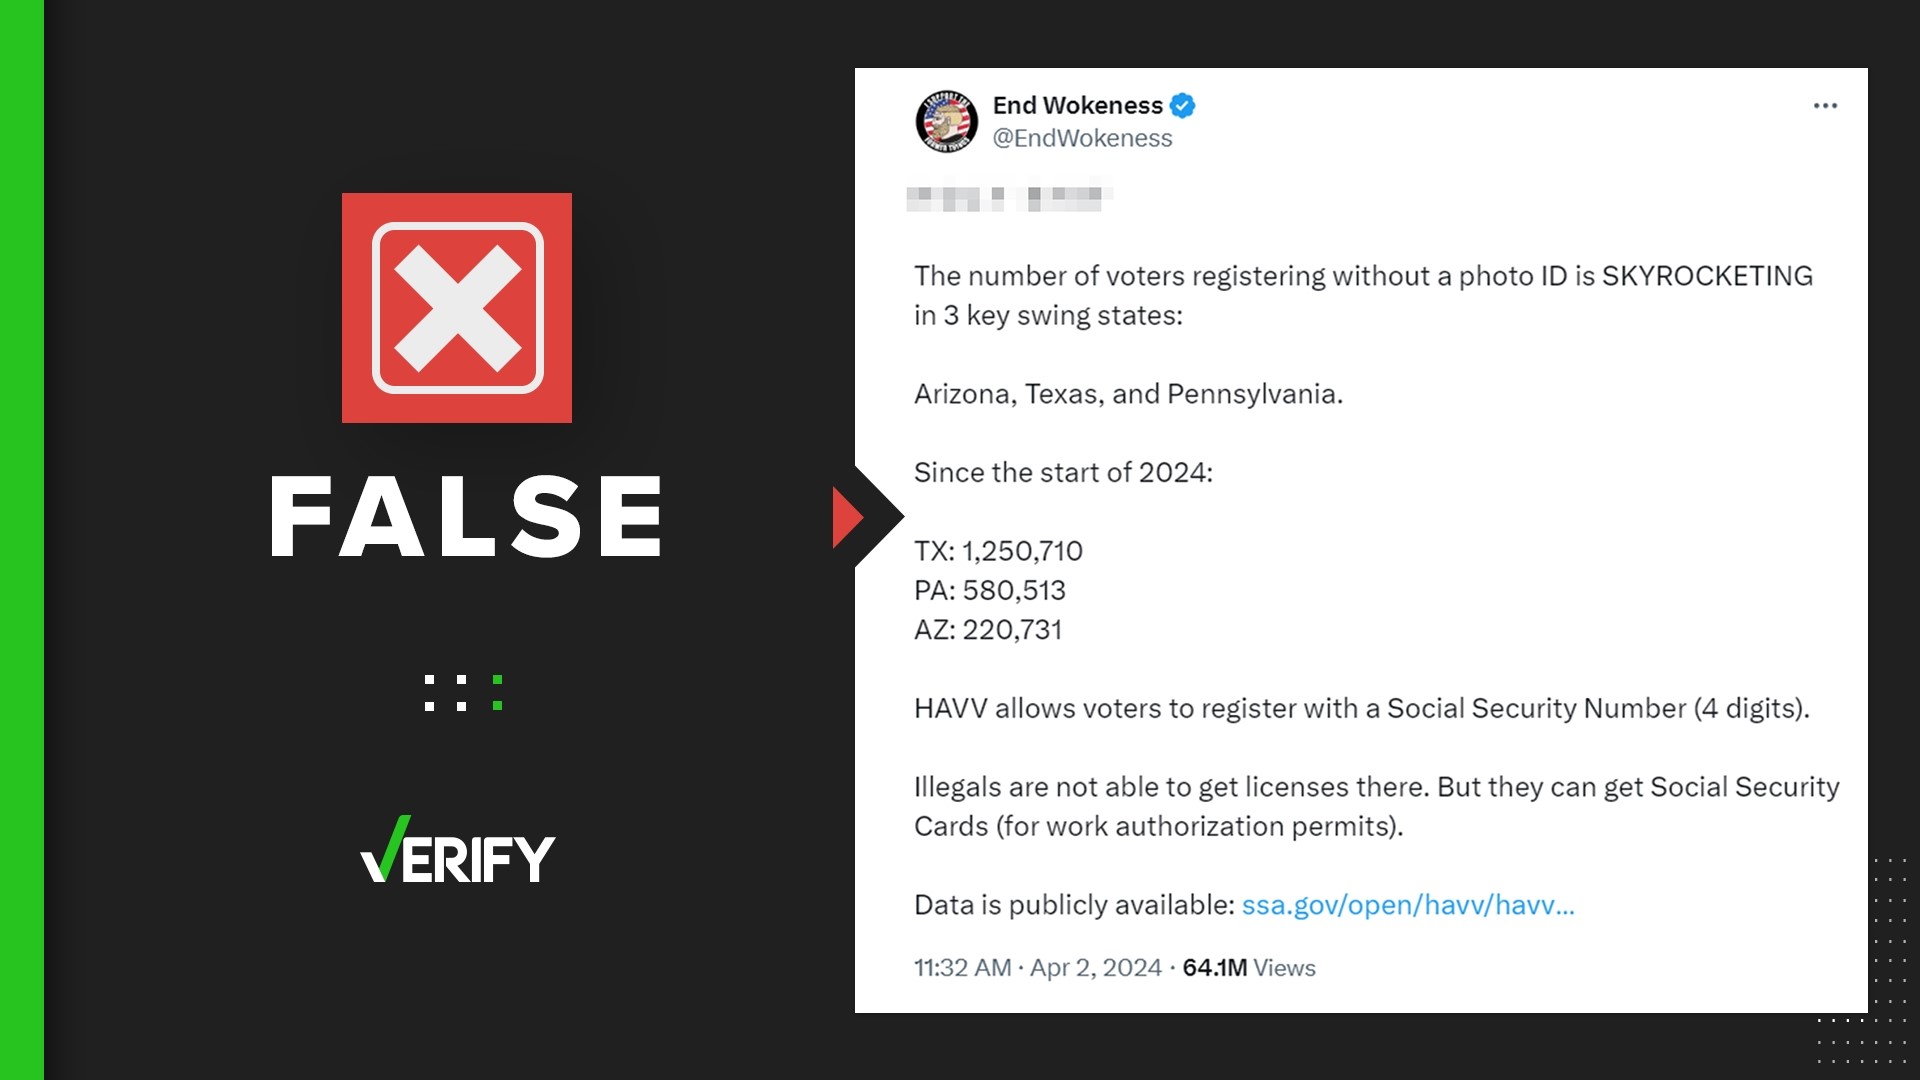 A post shared by Elon Musk claims more than 2 million people in Texas, Pennsylvania and Arizona registered to vote without IDs in 2024. Those numbers are wrong.